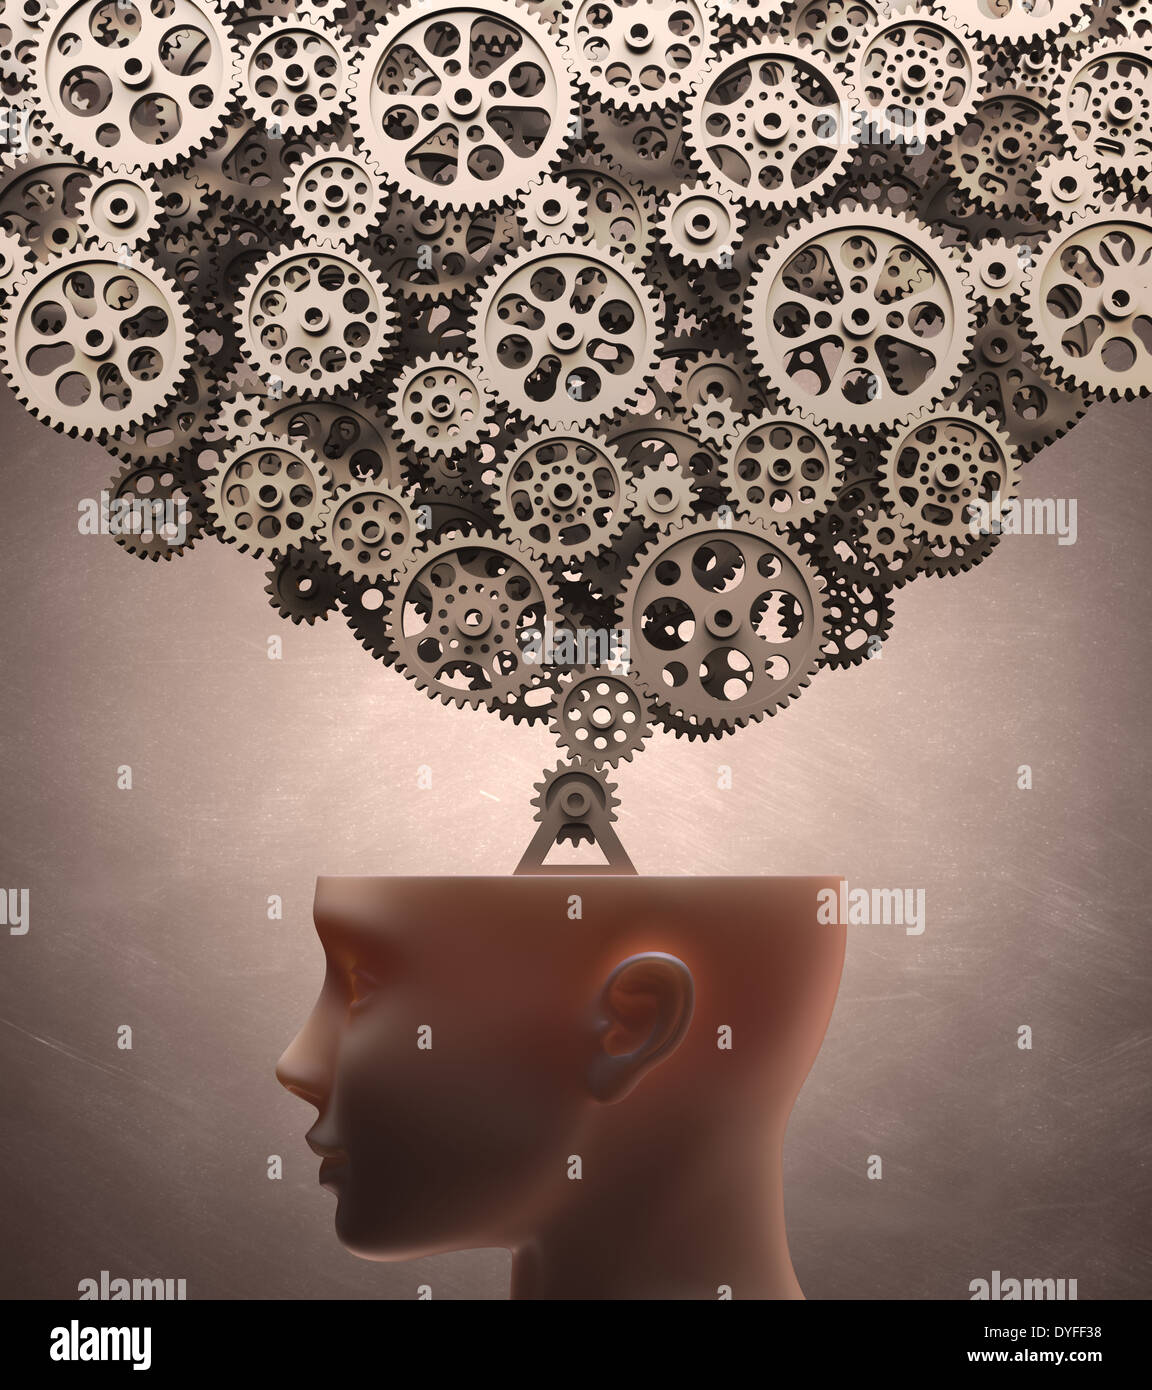 Several gear machine coming out of the brain. Clipping path included. Stock Photo